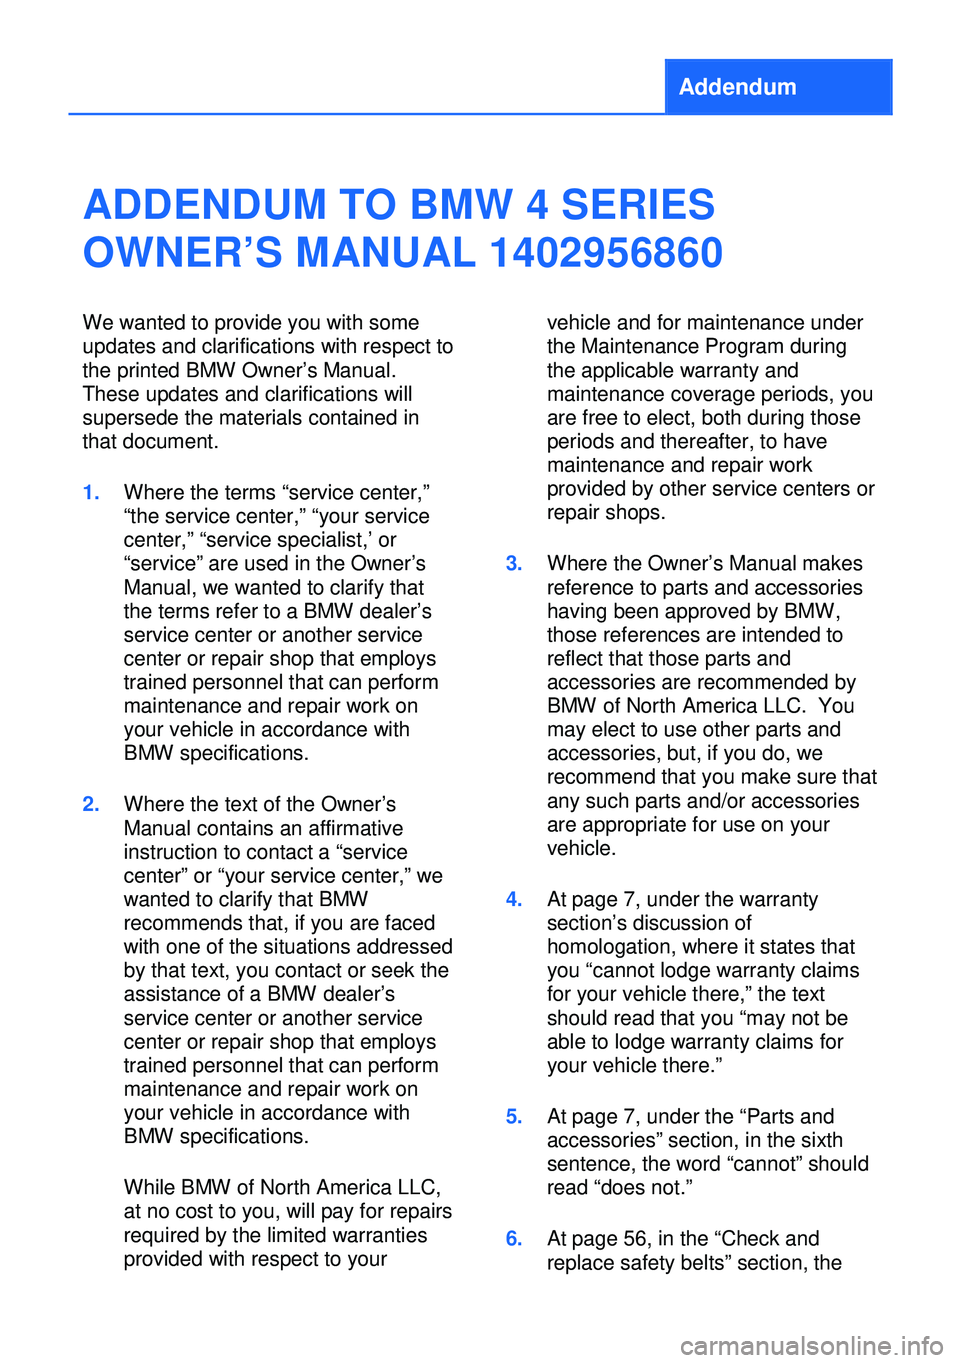 BMW 435I CONVERTIBLE 2014  Owners Manual Addendum
ADDENDUM TO BMW 4 SERIES
OWNER’S MANUAL 1402956860
We wanted to provide you with some
updates and clarifications with respect to
the printed BMW Owner’s Manual.
These updates and clarific